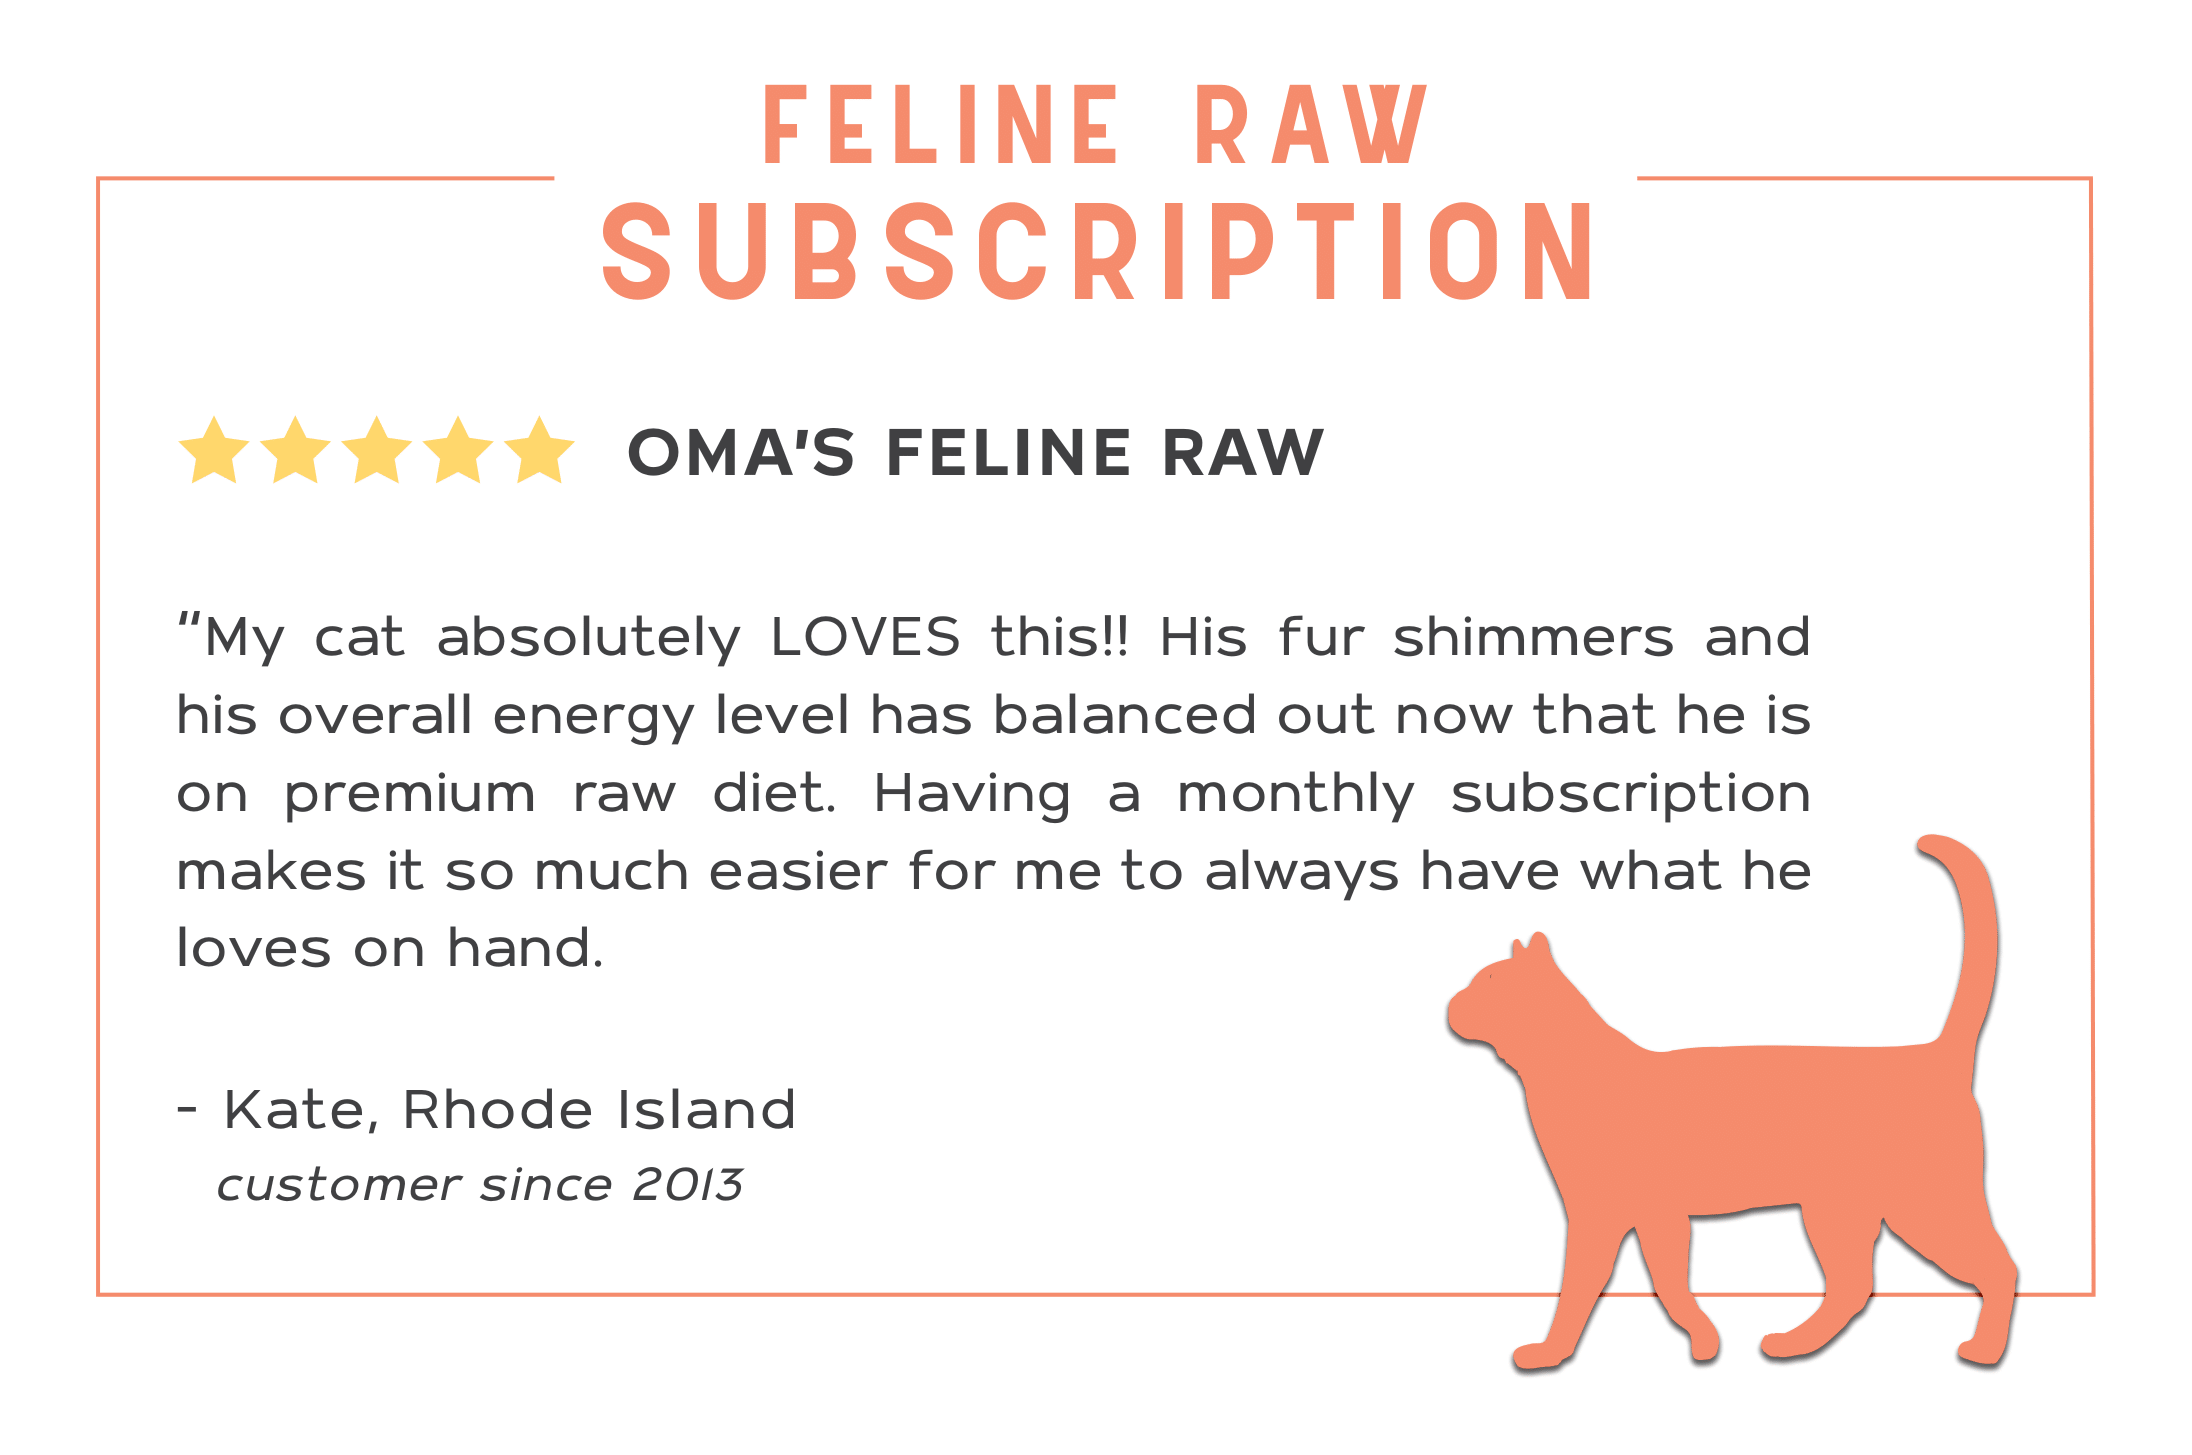 Customer review explaining why they love the feline raw subscription.